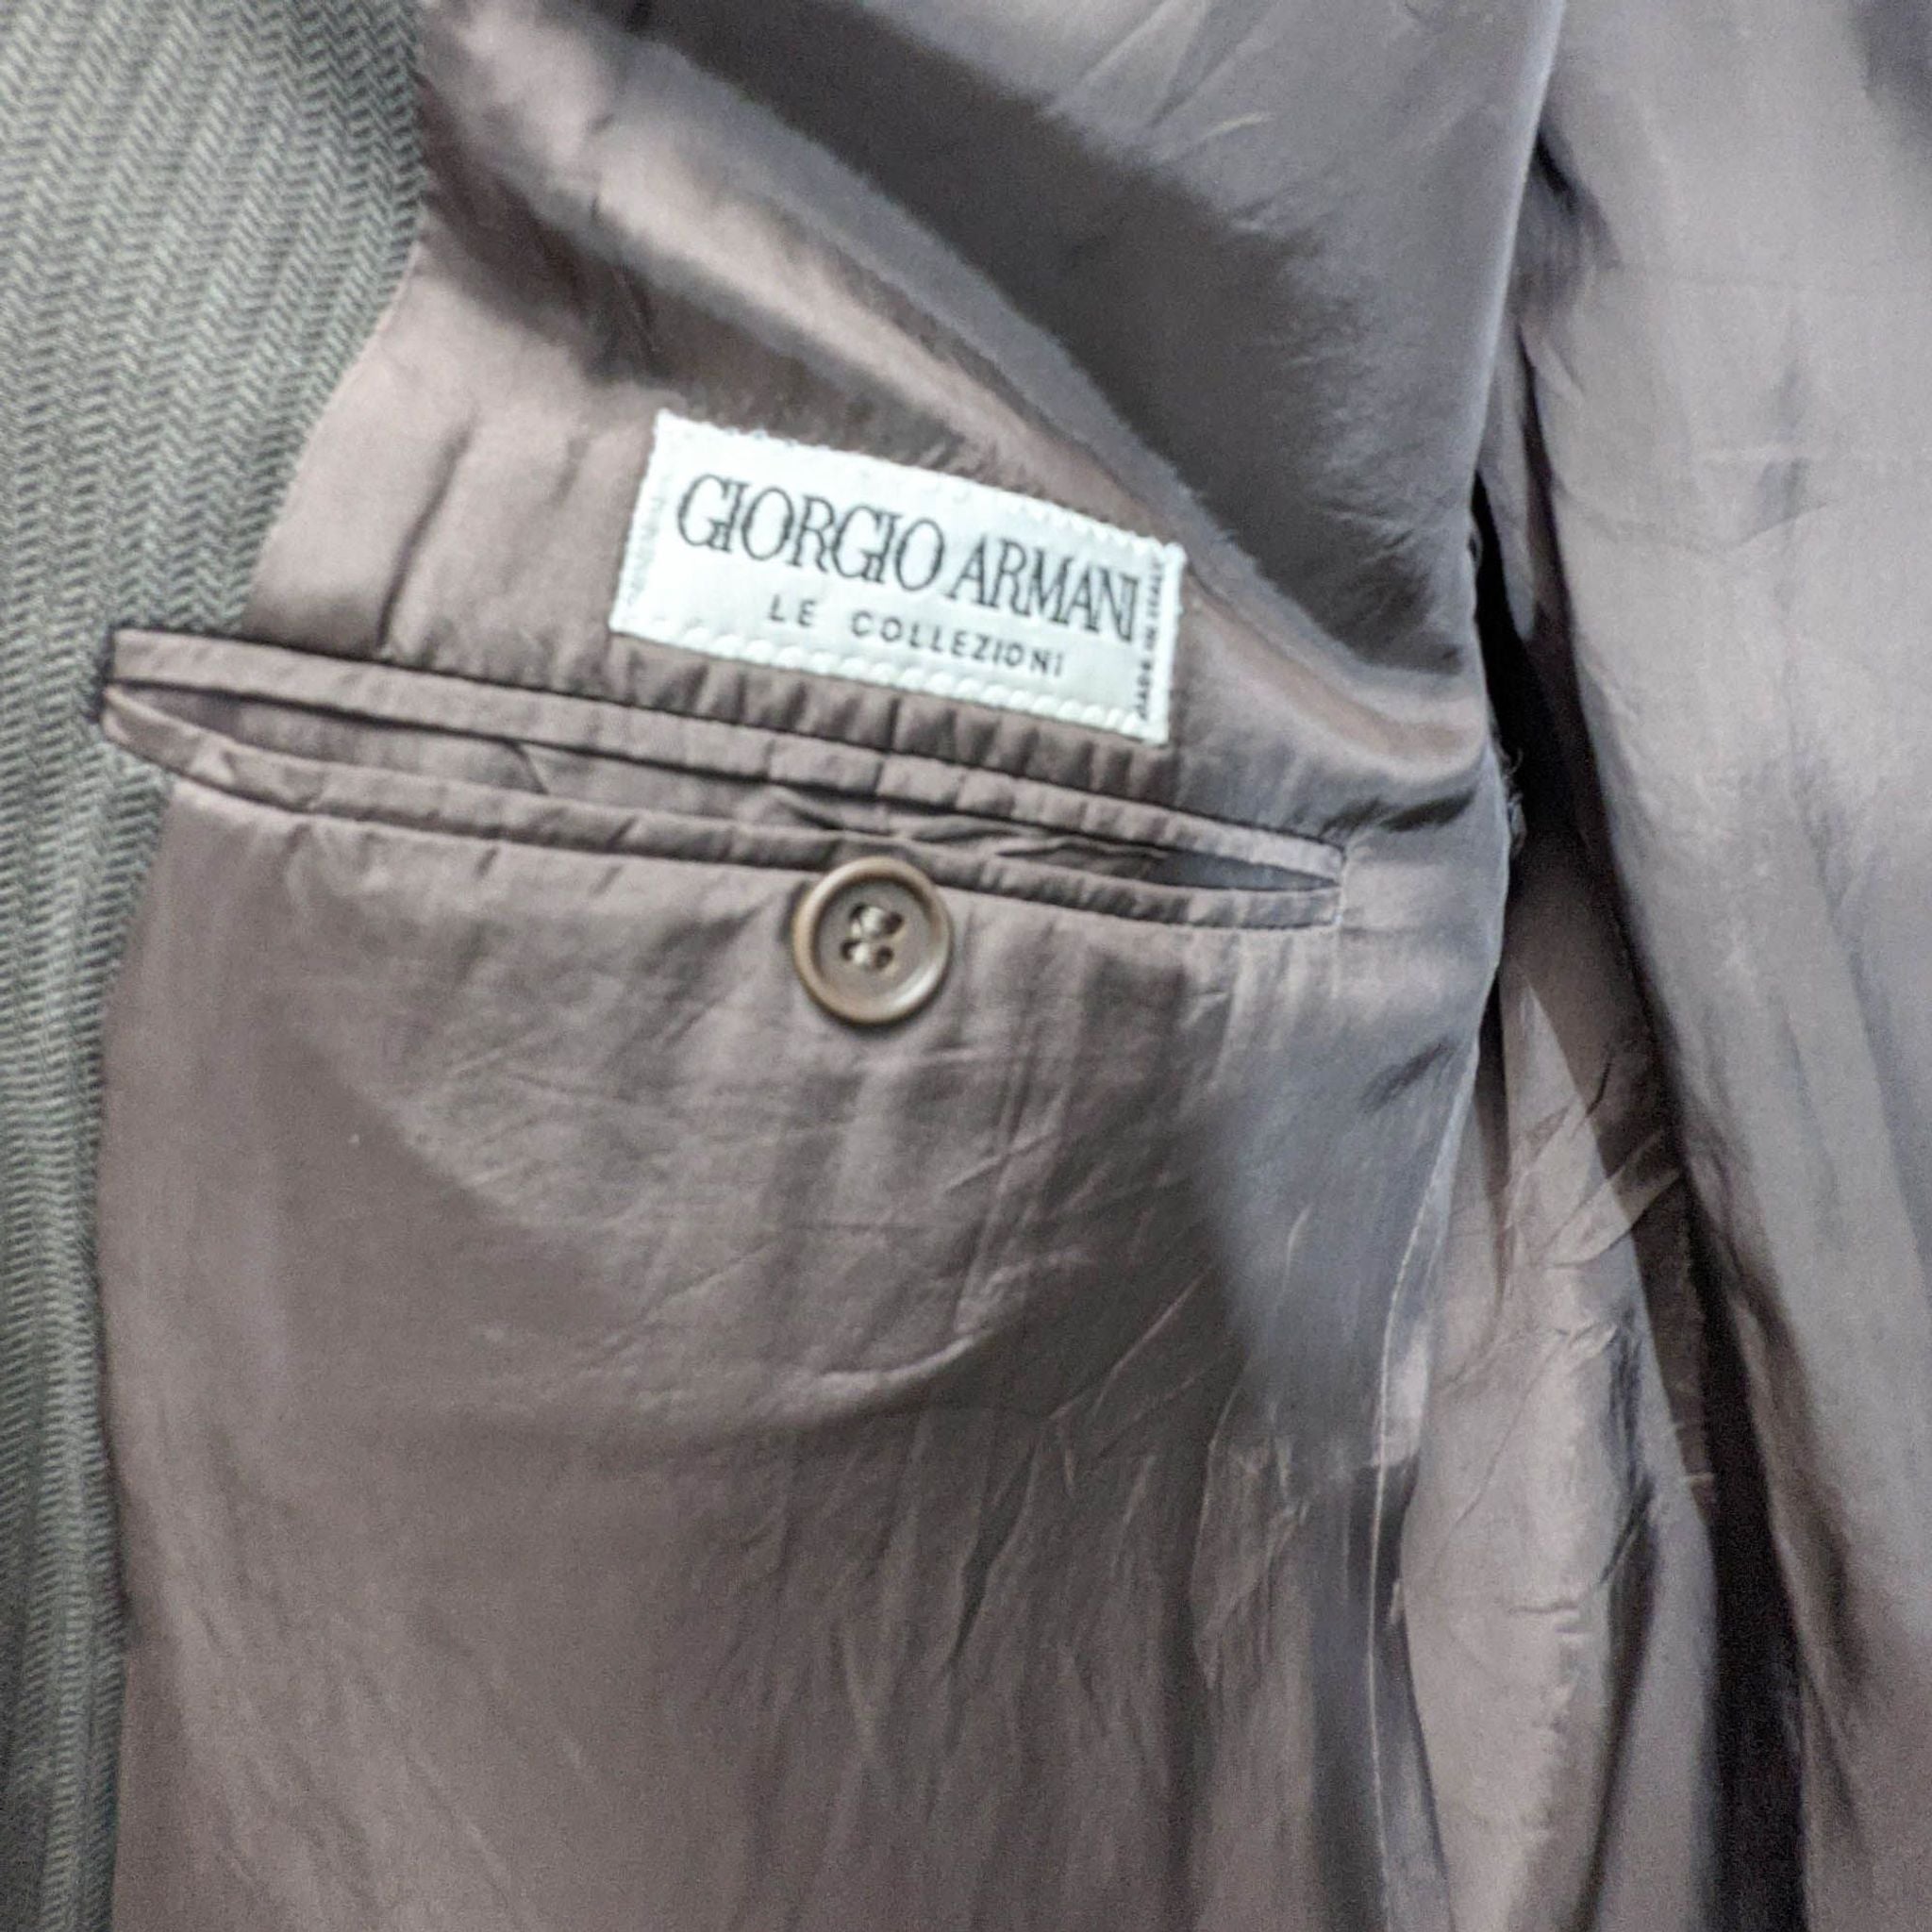 Close-up of a Giorgio Armani label on a men's grey suit with a buttoned pocket.